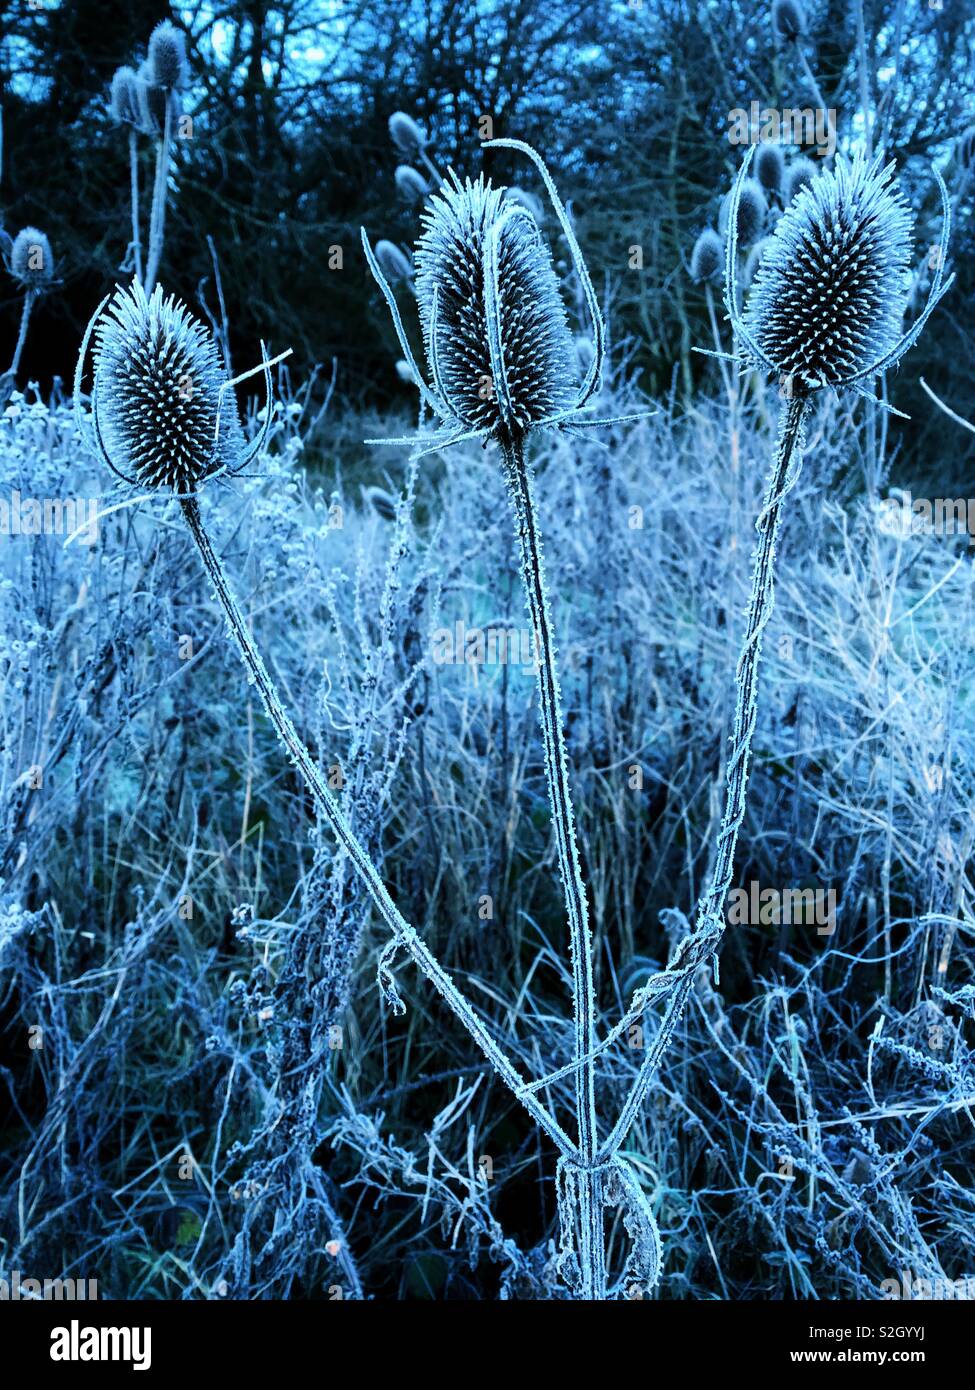 Frosted teasel heads Stock Photo